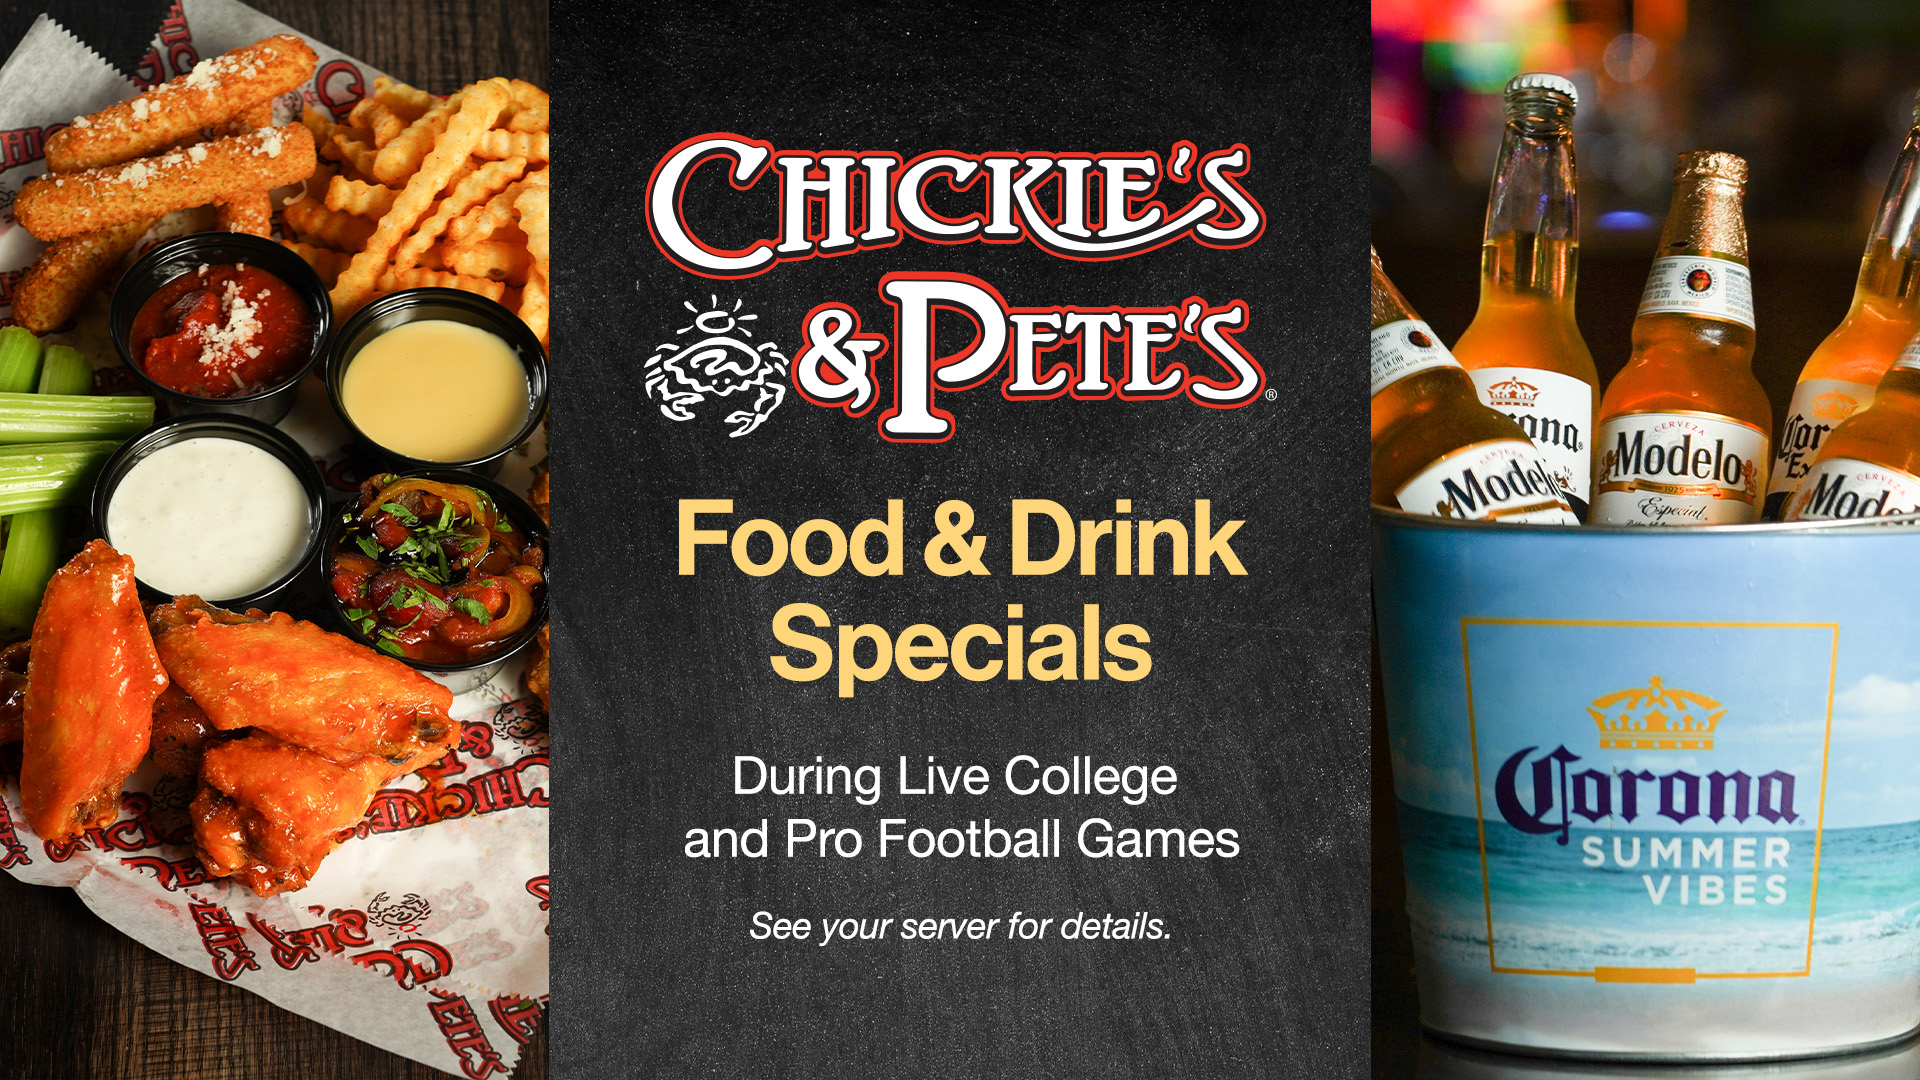 202309_Chickies-and-Petes-Combo-Platter-Beer-Special_Indoor-Horizontal_1920x1080